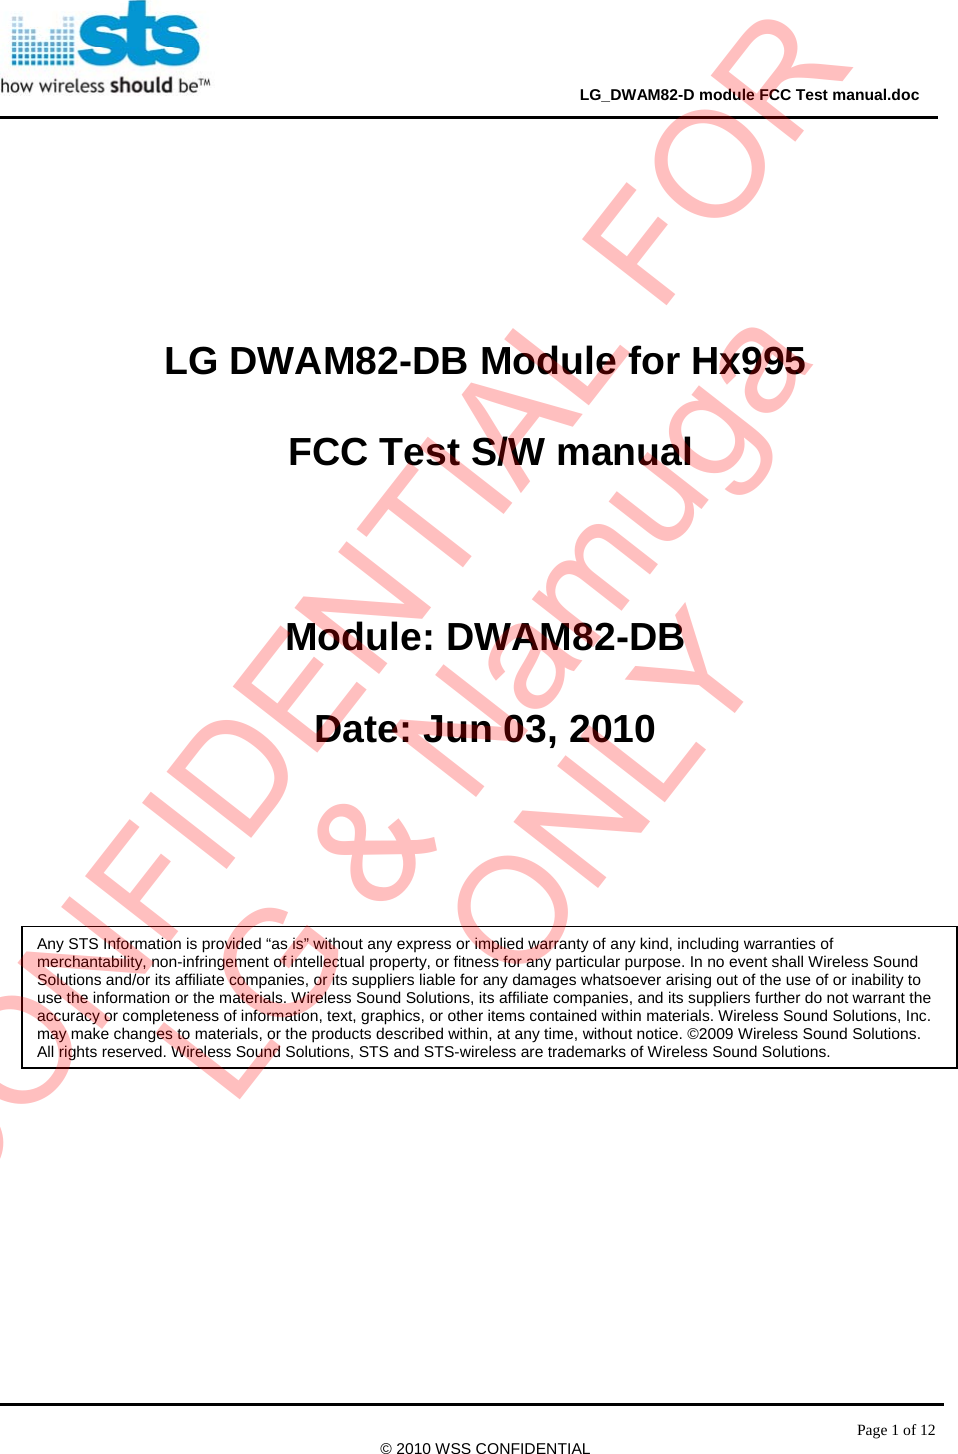                                                                                     LG_DWAM82-D module FCC Test manual.doc Page 1 of 12 © 2010 WSS CONFIDENTIAL       LG DWAM82-DB Module for Hx995  FCC Test S/W manual  Module: DWAM82-DB Date: Jun 03, 2010   Any STS Information is provided “as is” without any express or implied warranty of any kind, including warranties of merchantability, non-infringement of intellectual property, or fitness for any particular purpose. In no event shall Wireless Sound Solutions and/or its affiliate companies, or its suppliers liable for any damages whatsoever arising out of the use of or inability to use the information or the materials. Wireless Sound Solutions, its affiliate companies, and its suppliers further do not warrant the accuracy or completeness of information, text, graphics, or other items contained within materials. Wireless Sound Solutions, Inc. may make changes to materials, or the products described within, at any time, without notice. ©2009 Wireless Sound Solutions. All rights reserved. Wireless Sound Solutions, STS and STS-wireless are trademarks of Wireless Sound Solutions. CONFIDENTIAL FORLG &amp; NamugaONLY